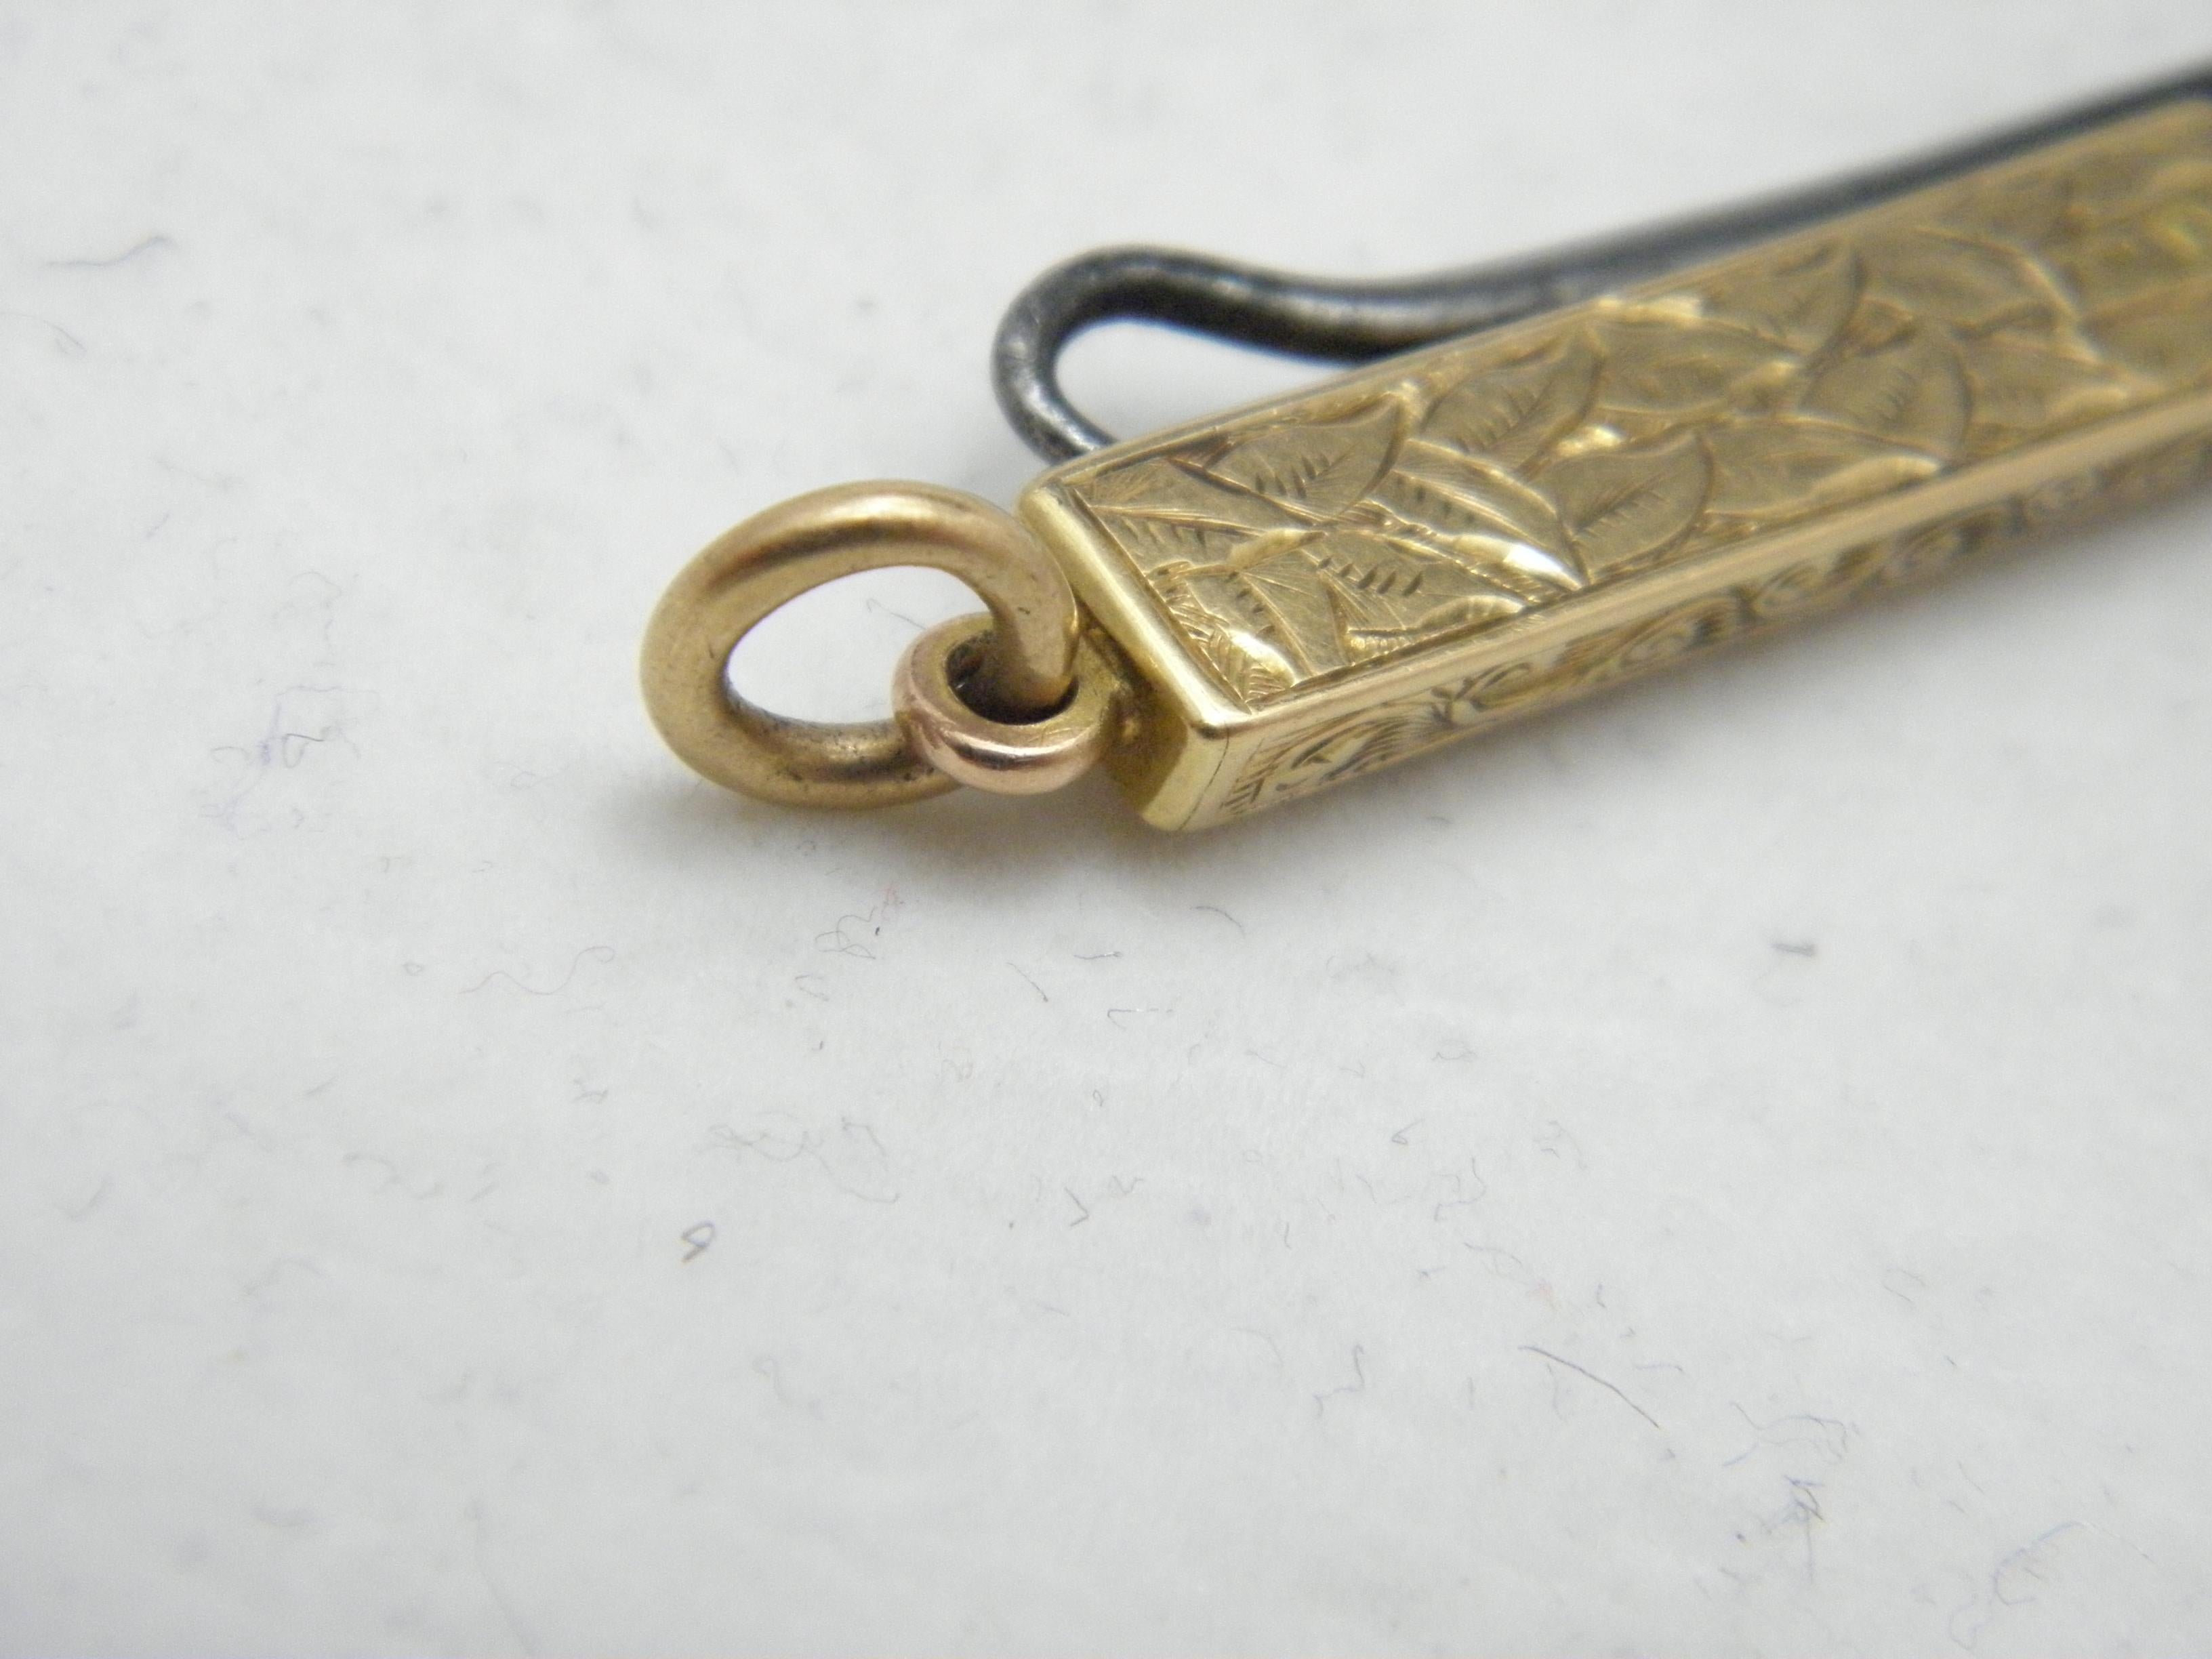 Antique 18ct Gold Button Hook Fob Pendant Charm C1892 750 Purity Heavy 8.1g In Good Condition For Sale In Camelford, GB